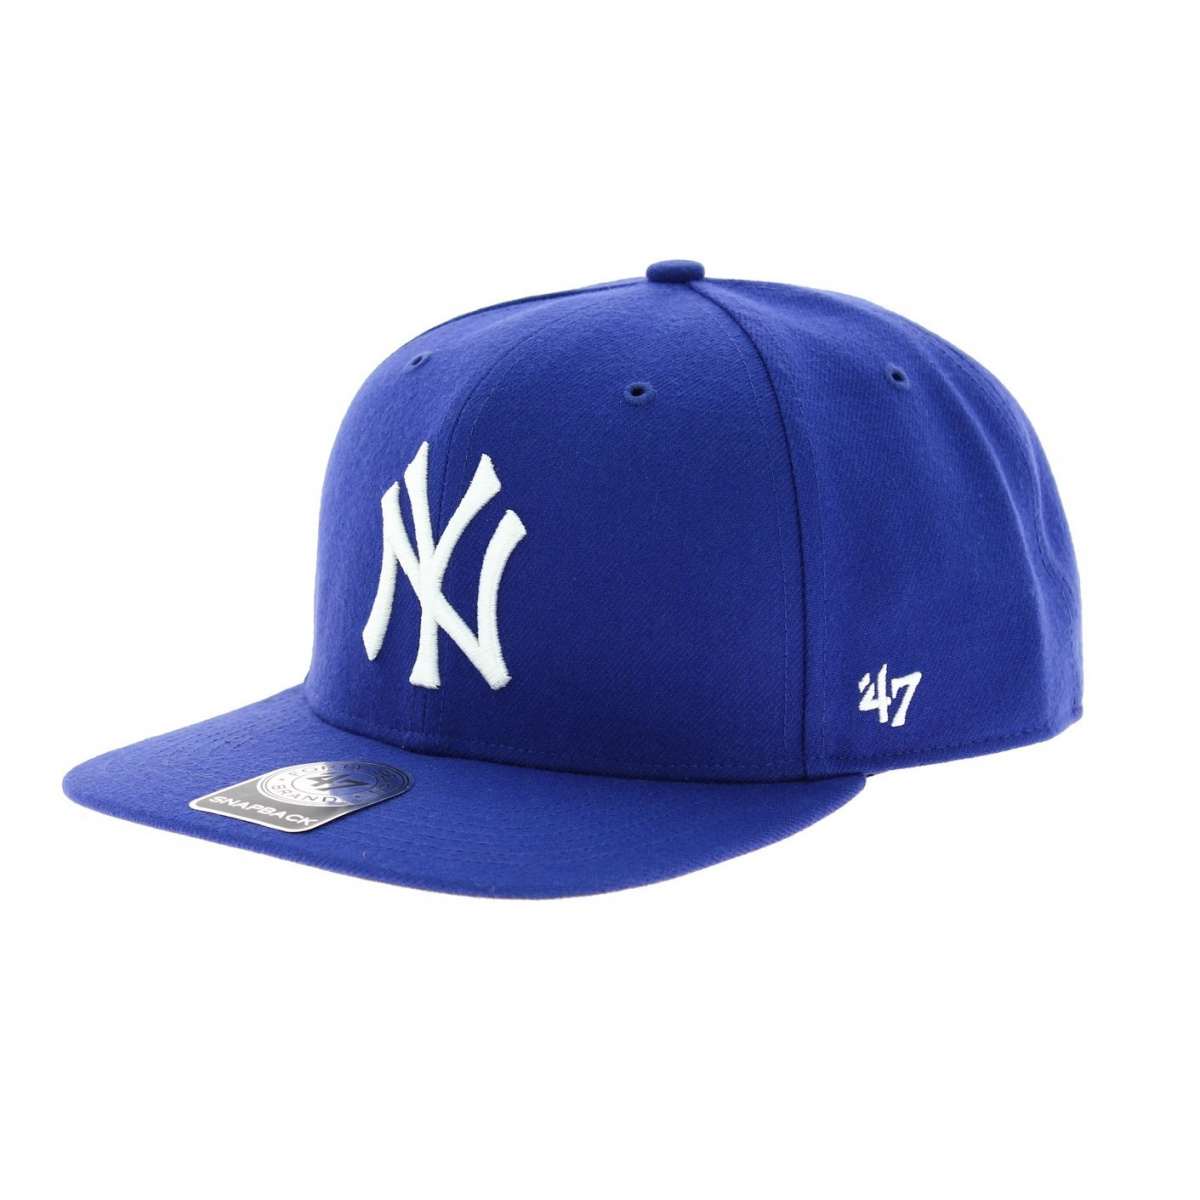 Casquette snapback NY bleue - 47 Brand Reference : 5629